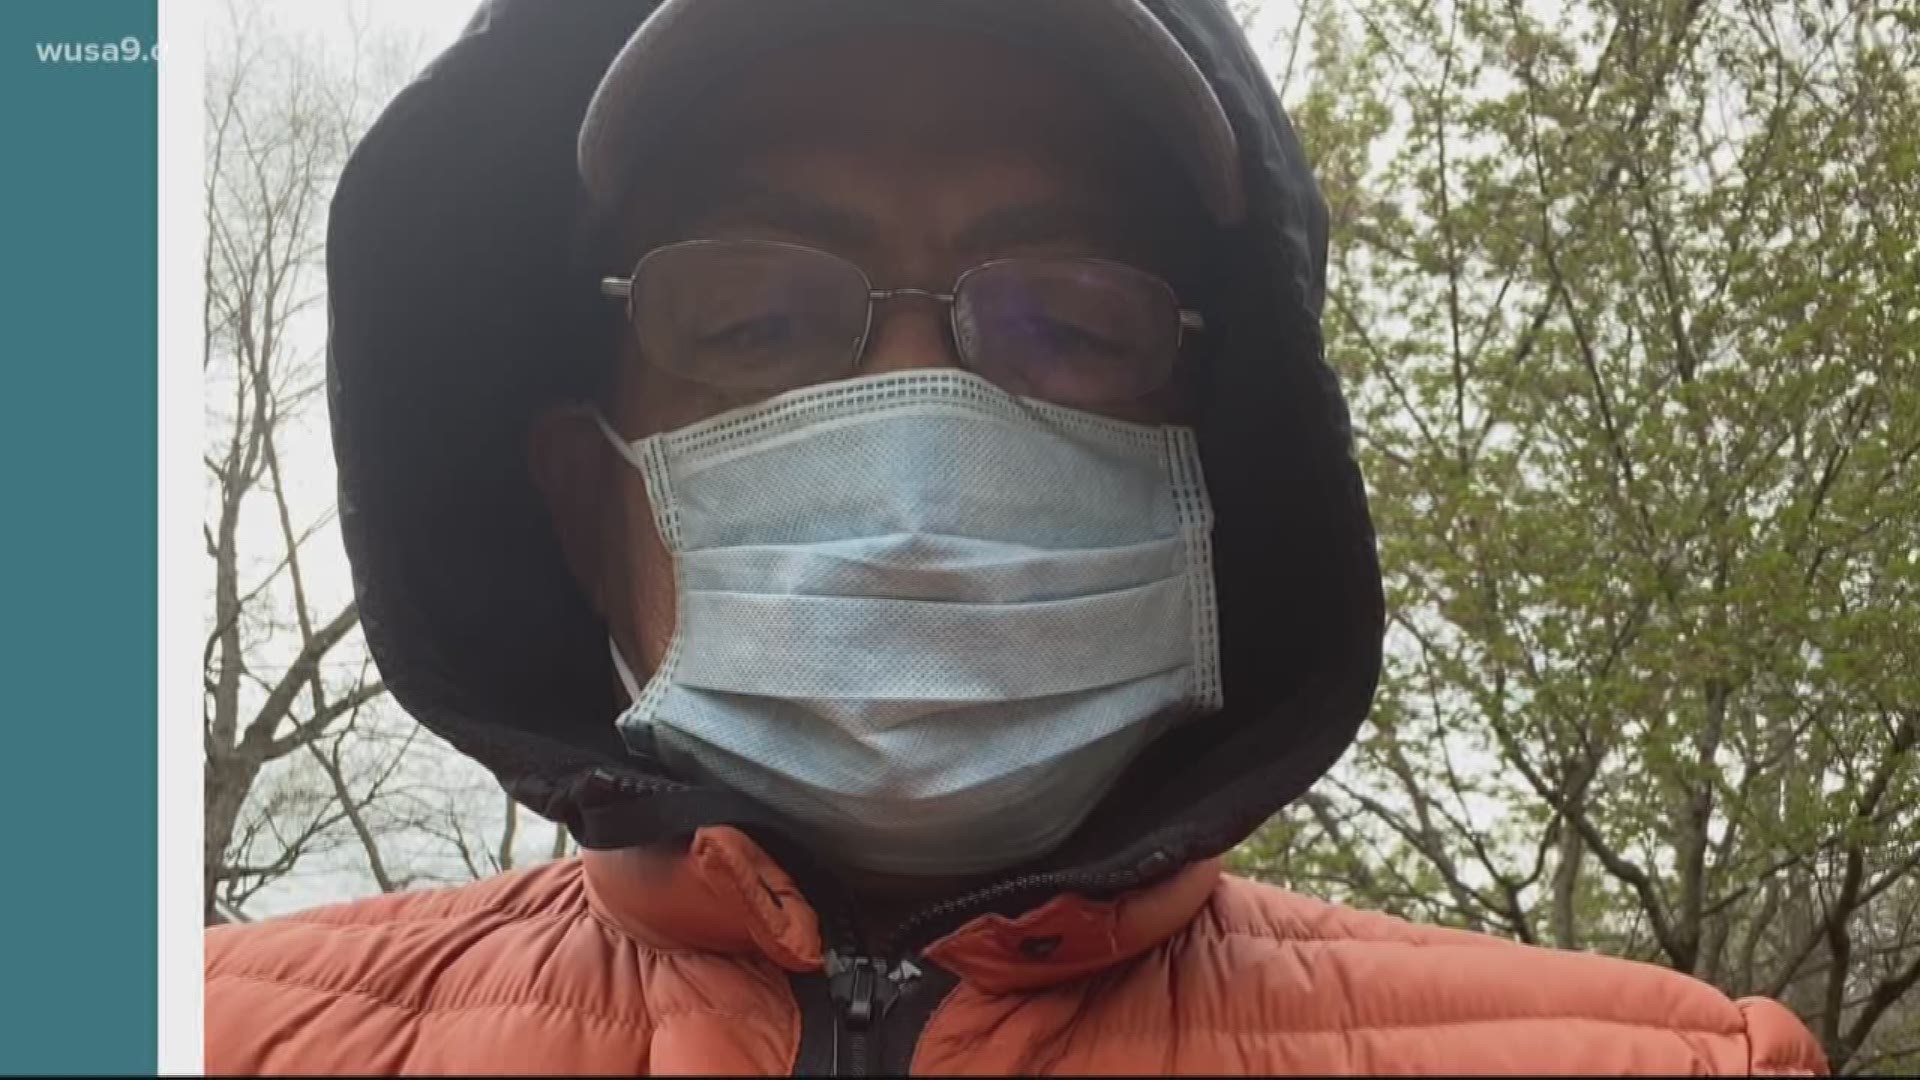 In Final Thought, Bruce Johnson takes a look at the face mask confusion, types of masks, and what protection it affords in the COVID-19 pandemic.